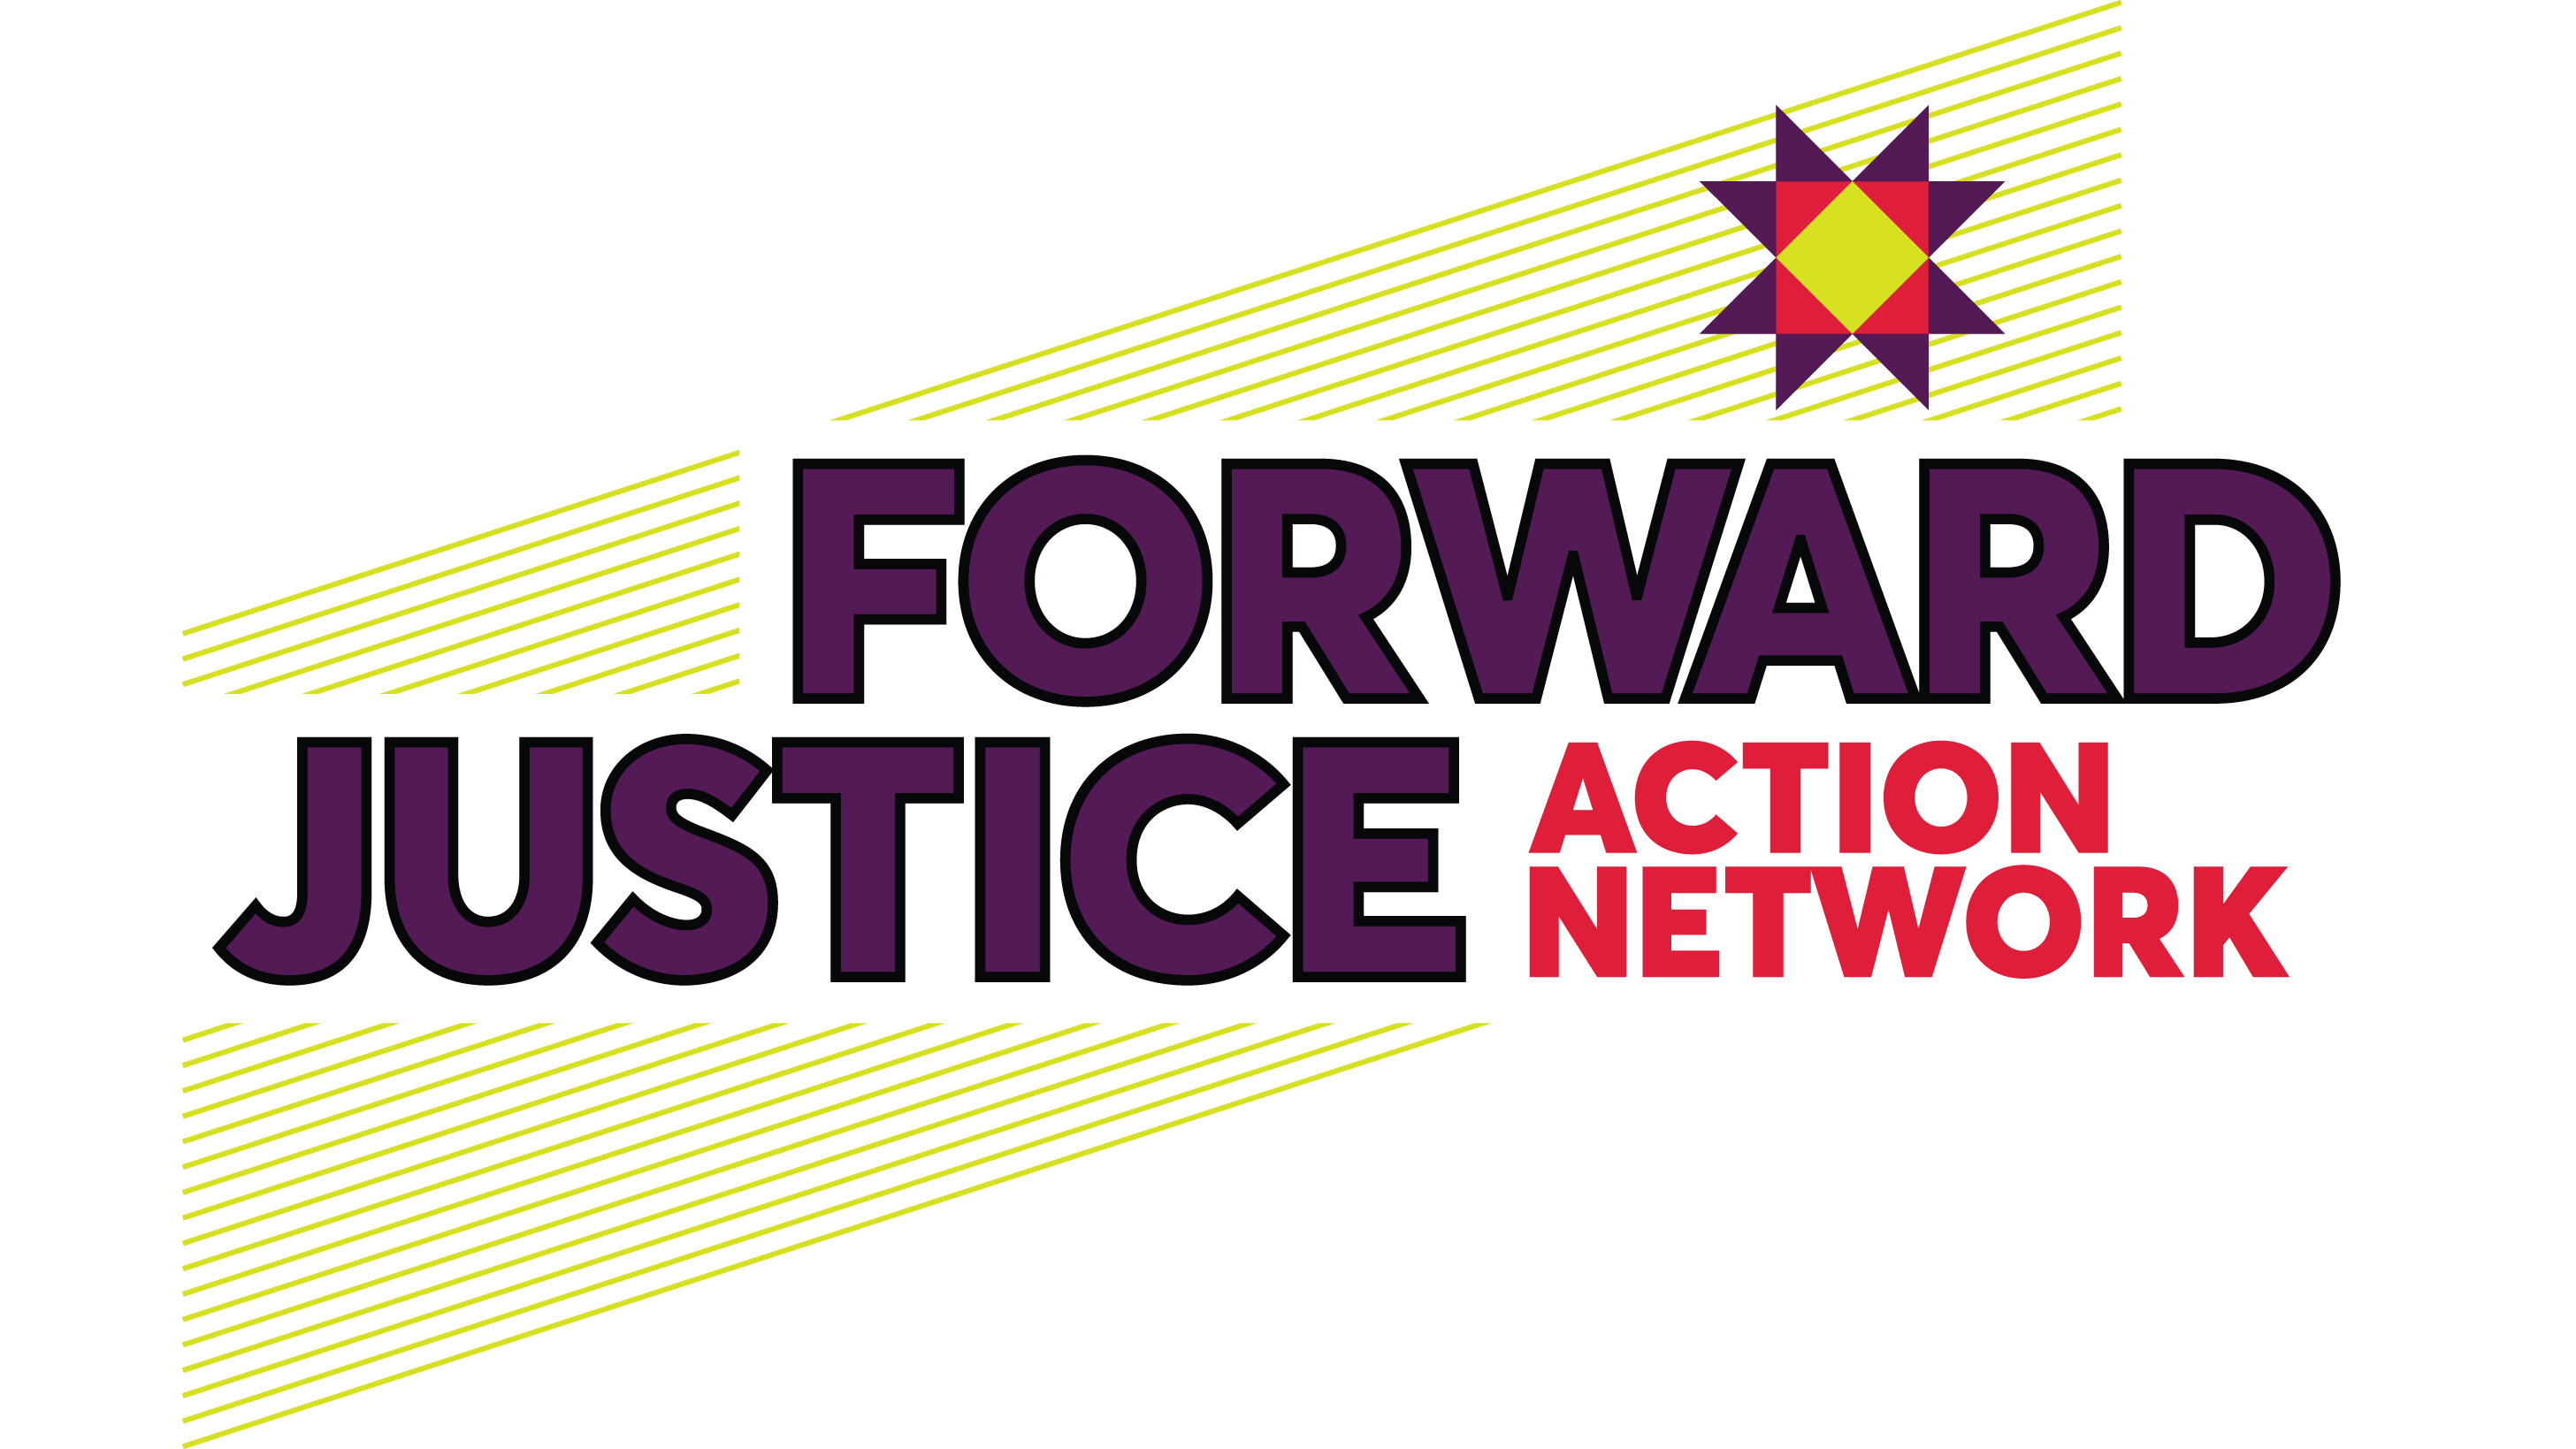 Forward Justice Action Network logo